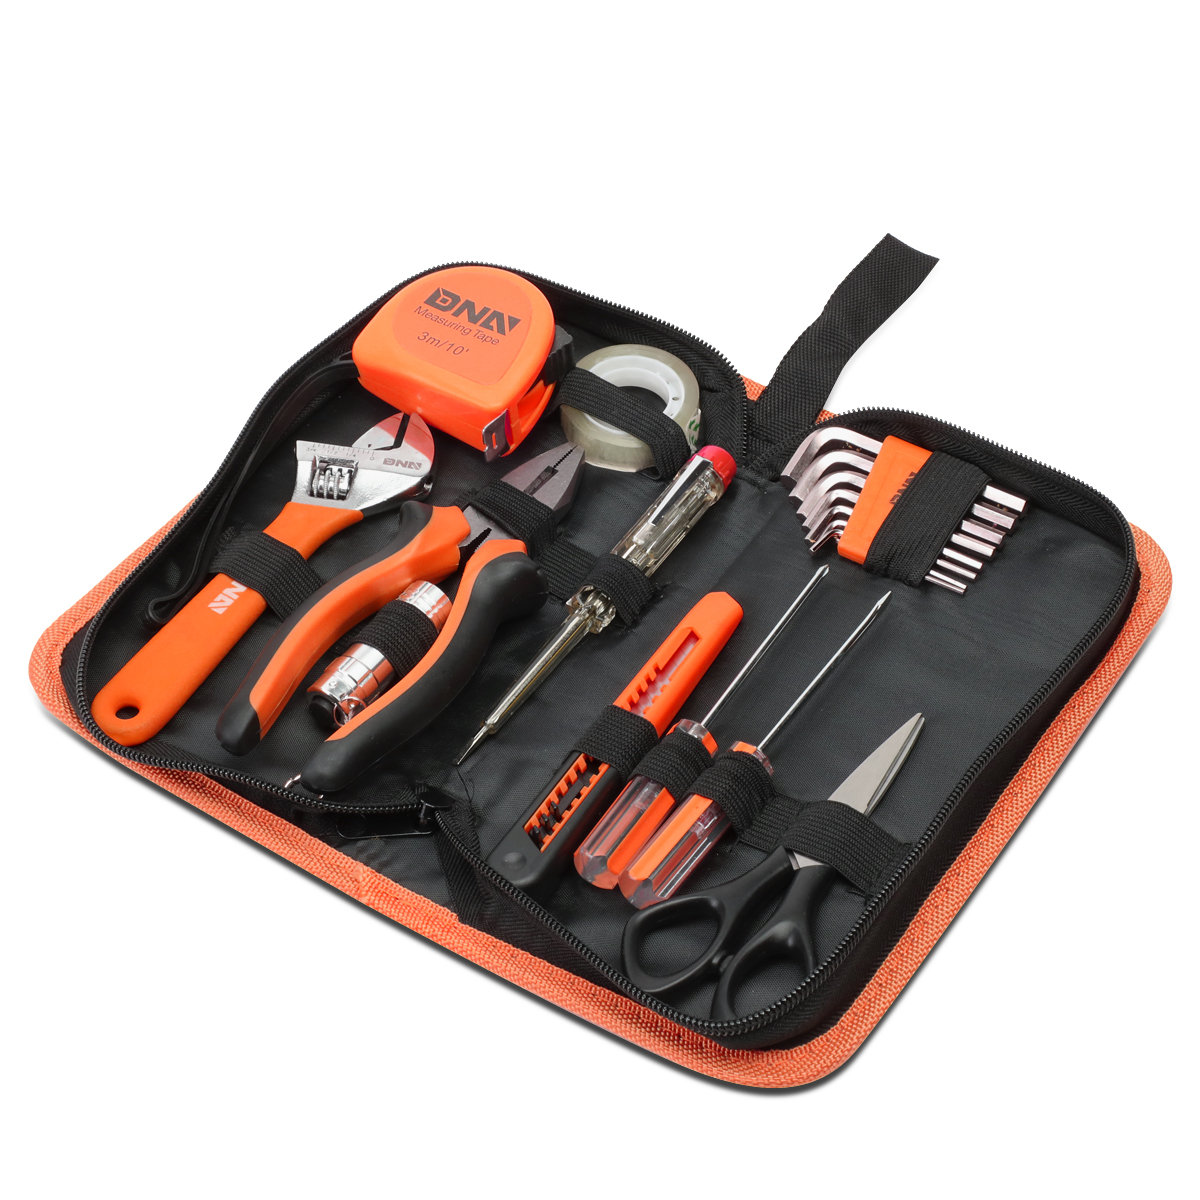 DNA Motoring TOOLS-00032 18 Piece Mechanic's Home Repair Tool Set, Includes Pliers, Wrench, Hex Keys, Screwdrivers, Scissors, and Tape Measurer, 1